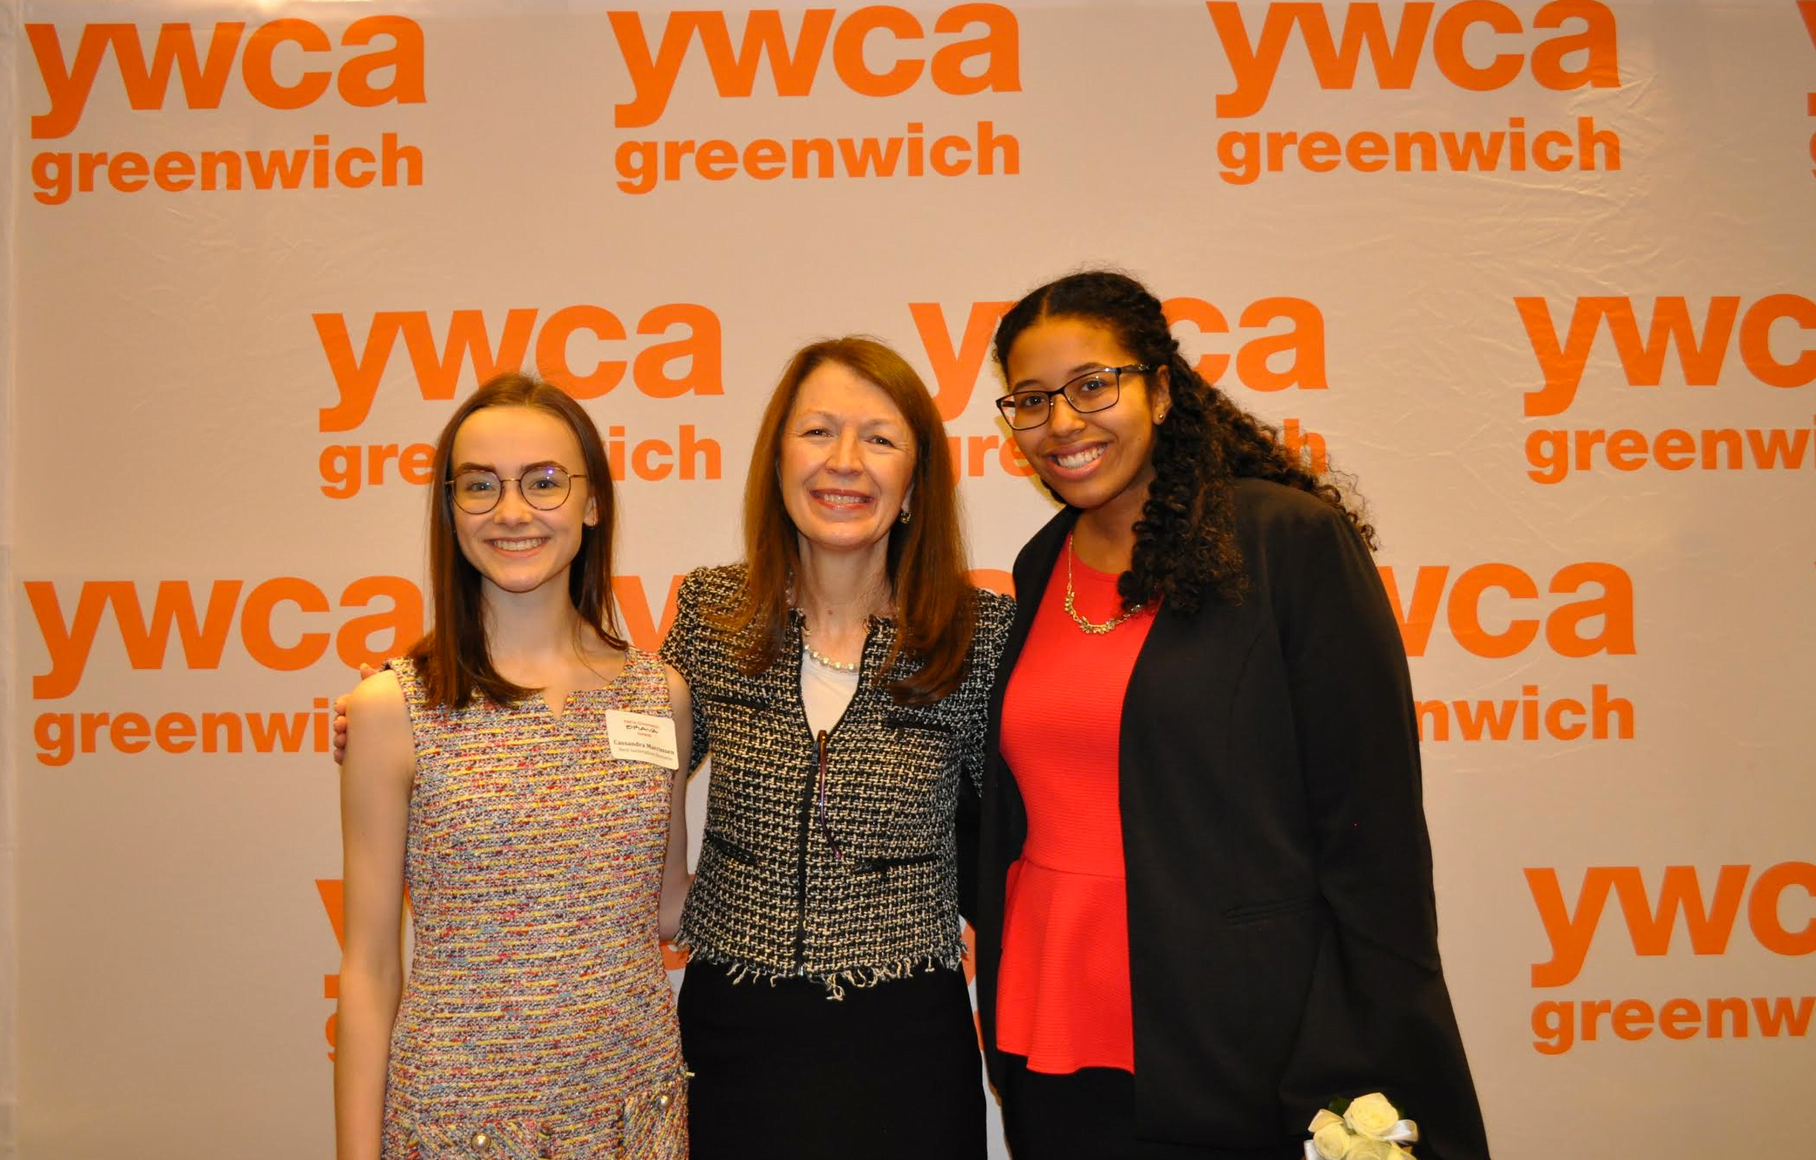 GHS seniors  Cassandra Marcussen (left) René LaPointe Jameson (right) with YWCA president and CEO Mary Lee Kiernan. Contributed photo Jan 19, 2018